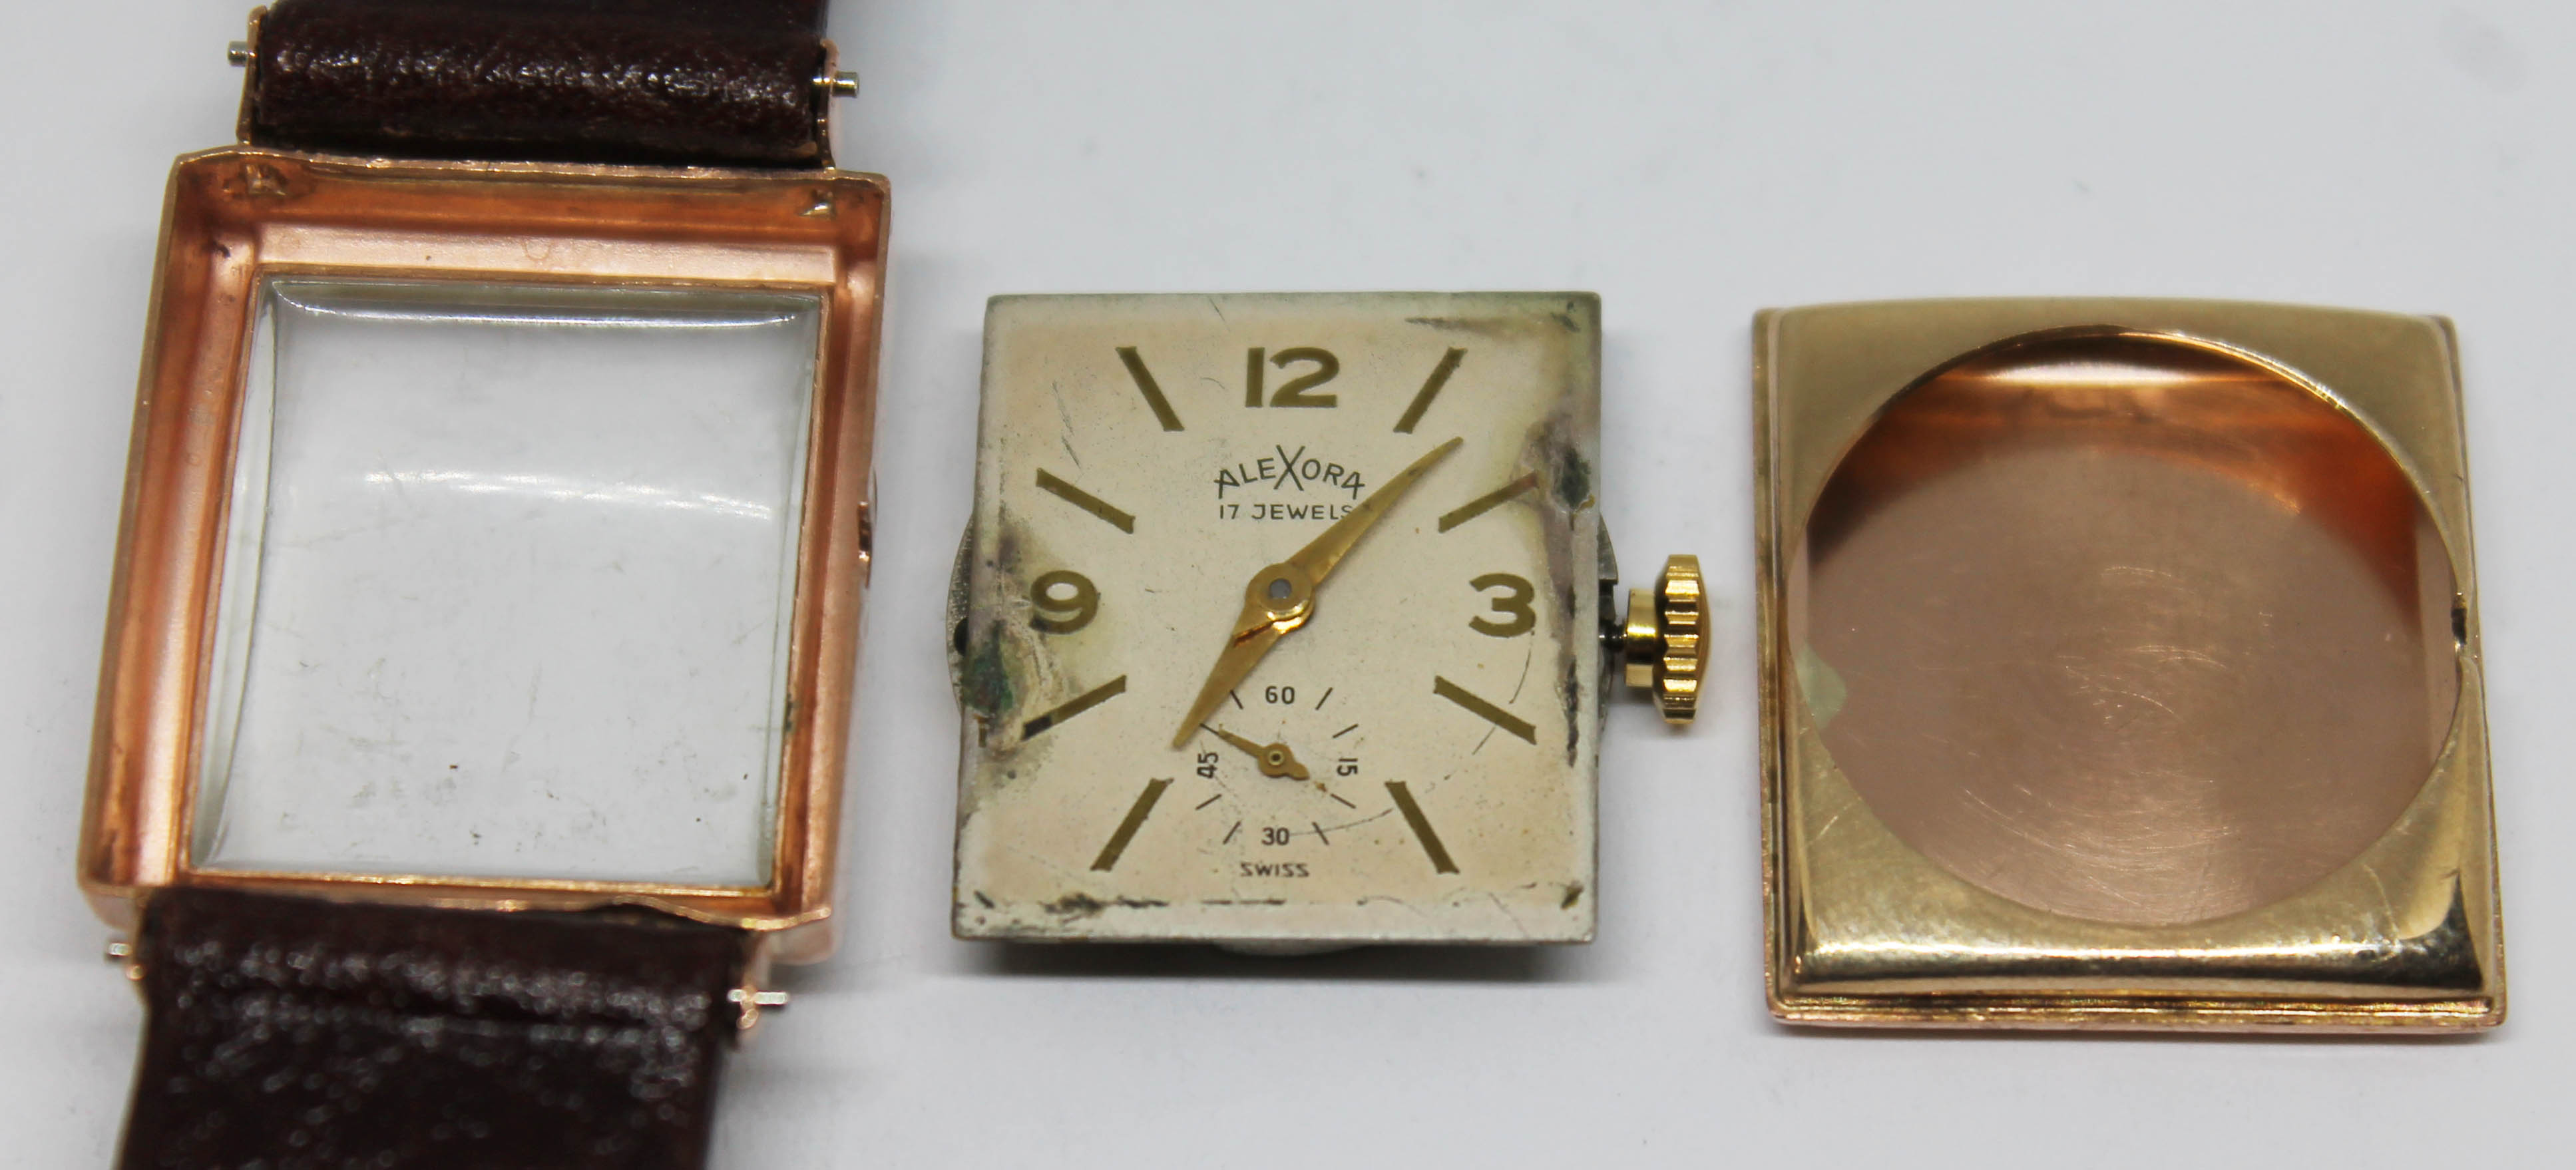 A vintage 14k gold Emerson Watch Co art deco style wristwatch, the dial signed Alexora with hands, - Image 3 of 8